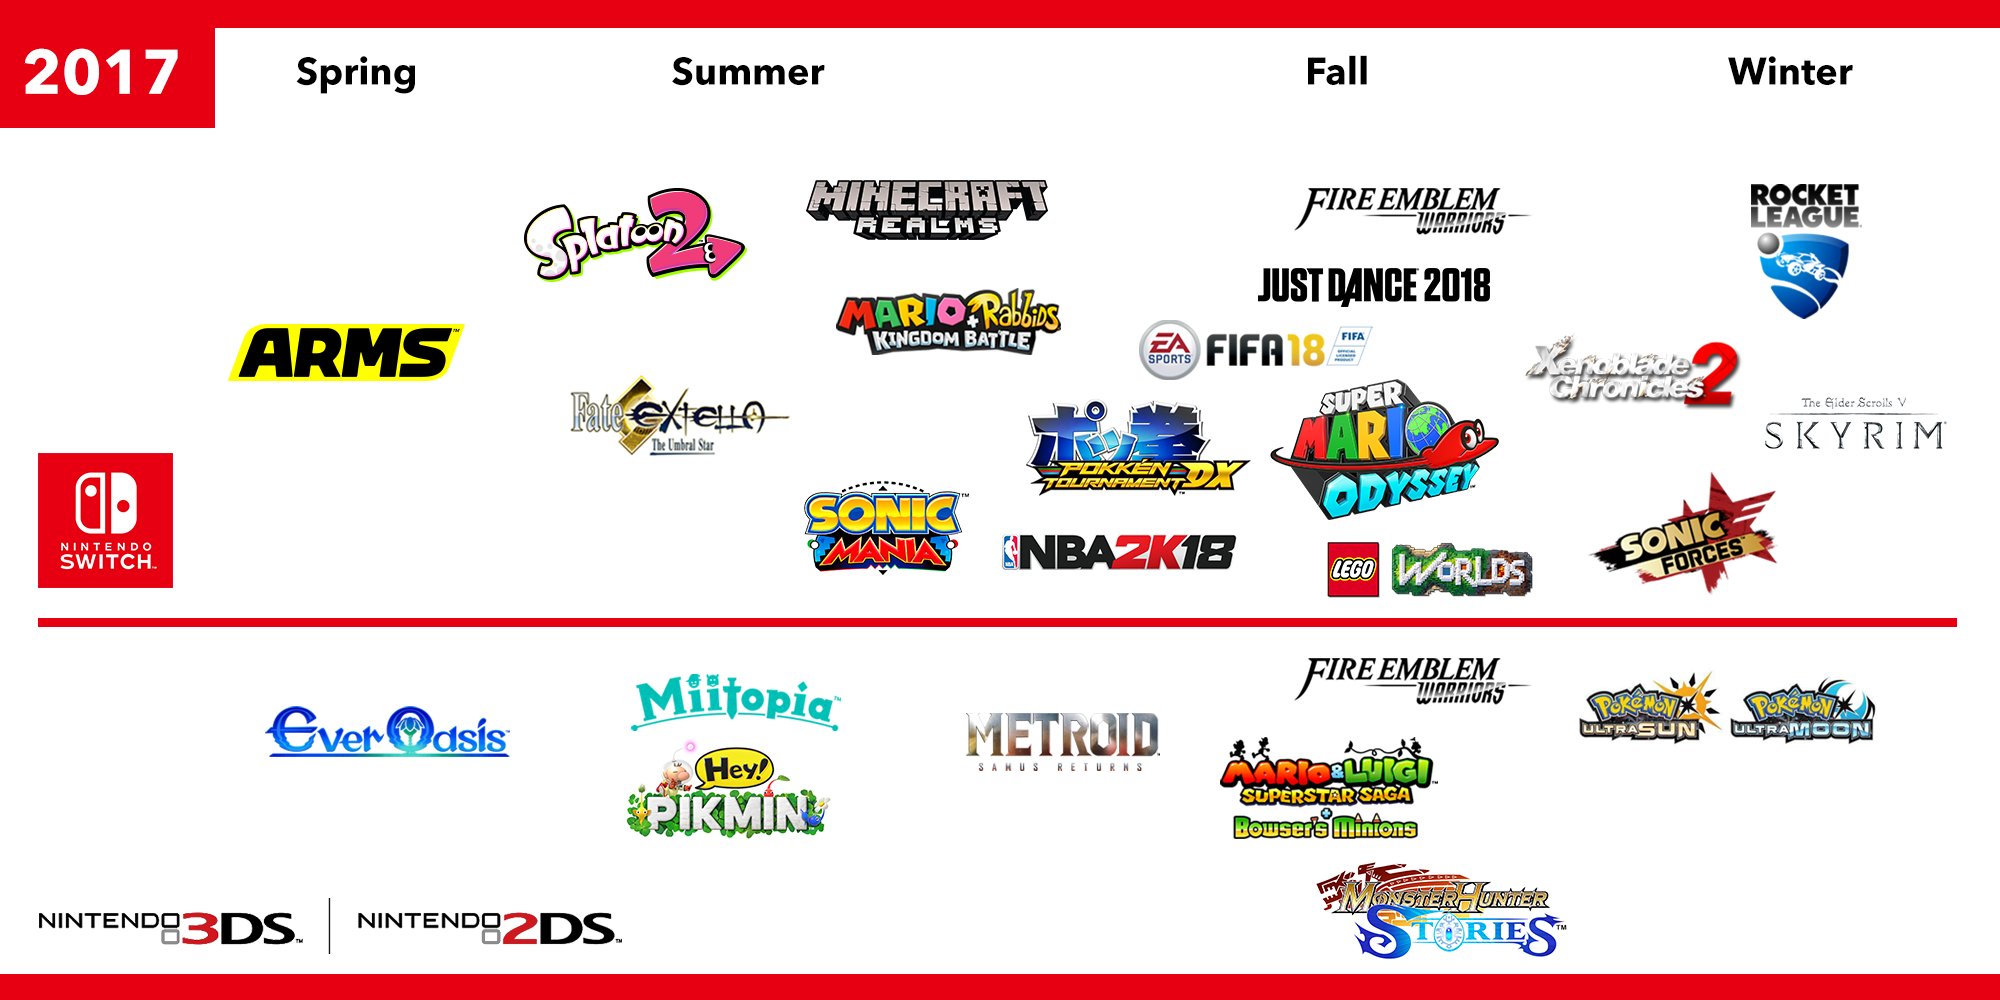 Upcoming Switch and 3DS games in 2017 DCduidmXYAEvmj9?format=jpg&name=large